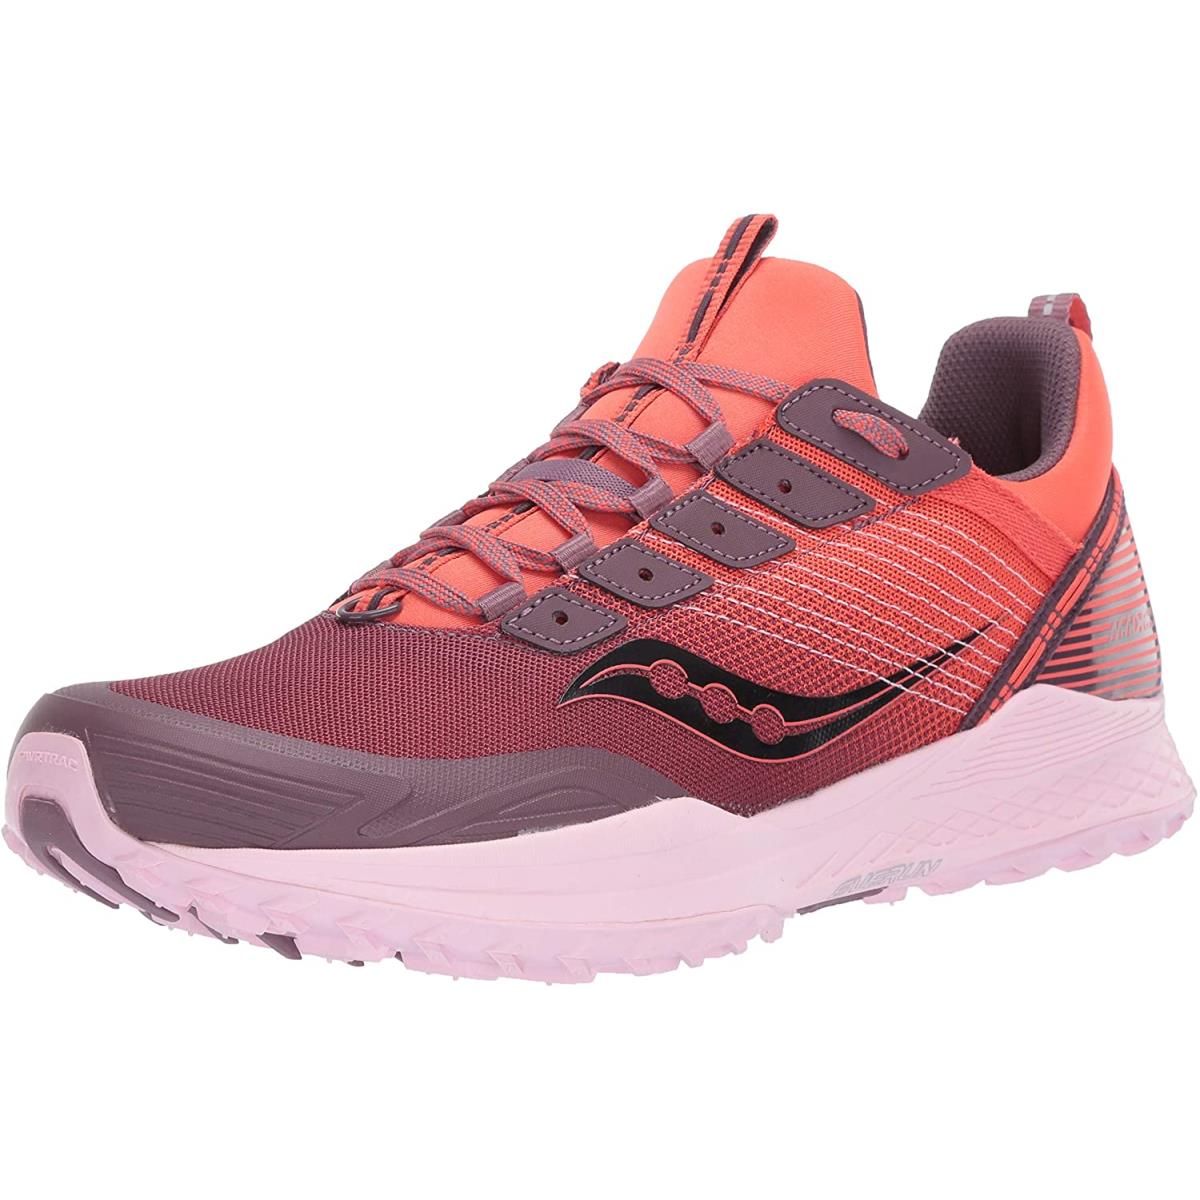 Saucony Women`s Mad River TR Trail Running Shoe Coral